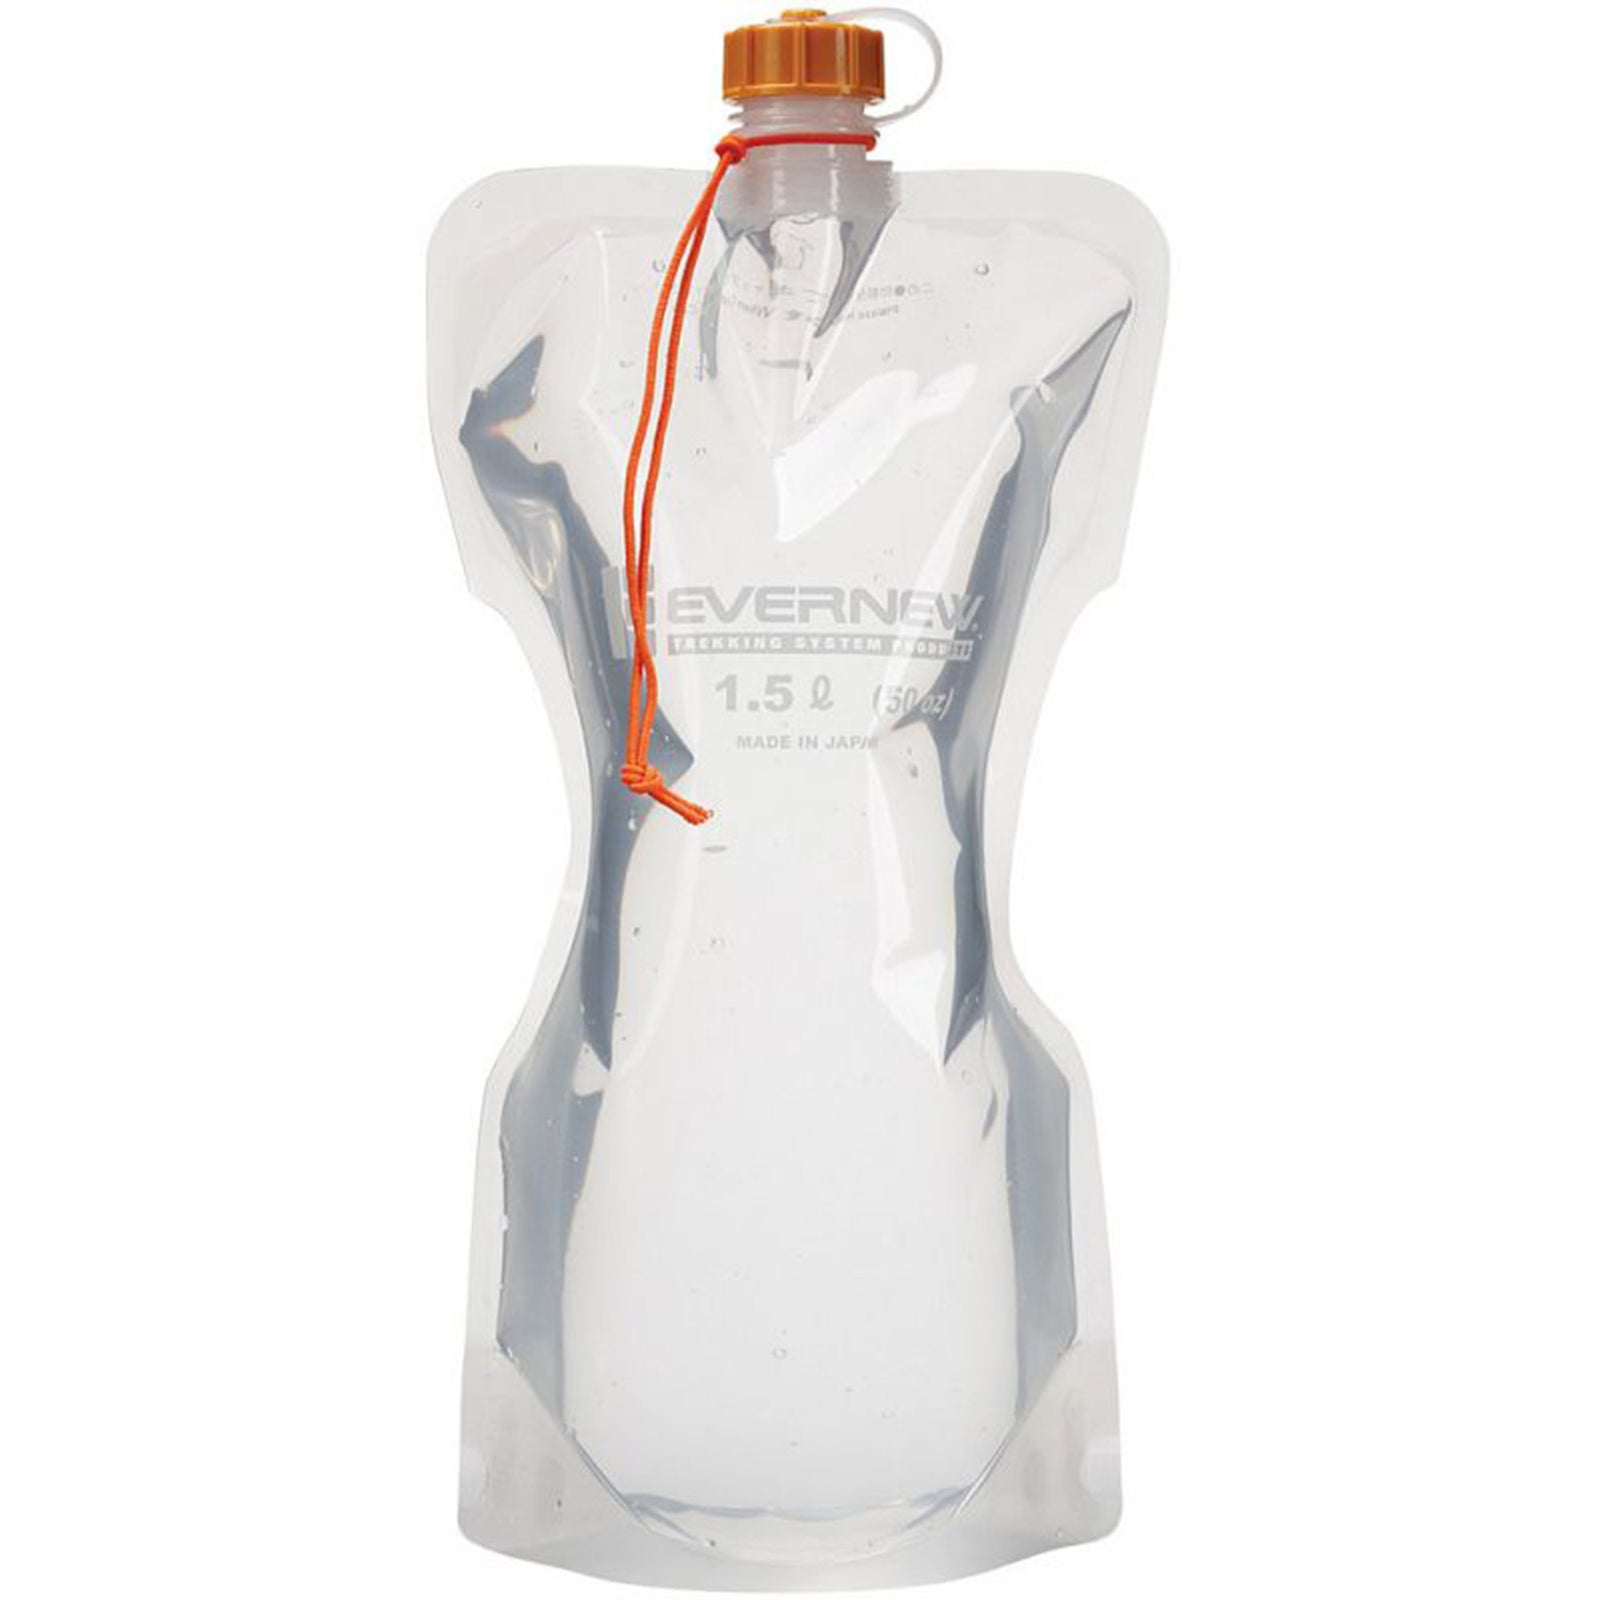 the 1.5 liter evernew water bag